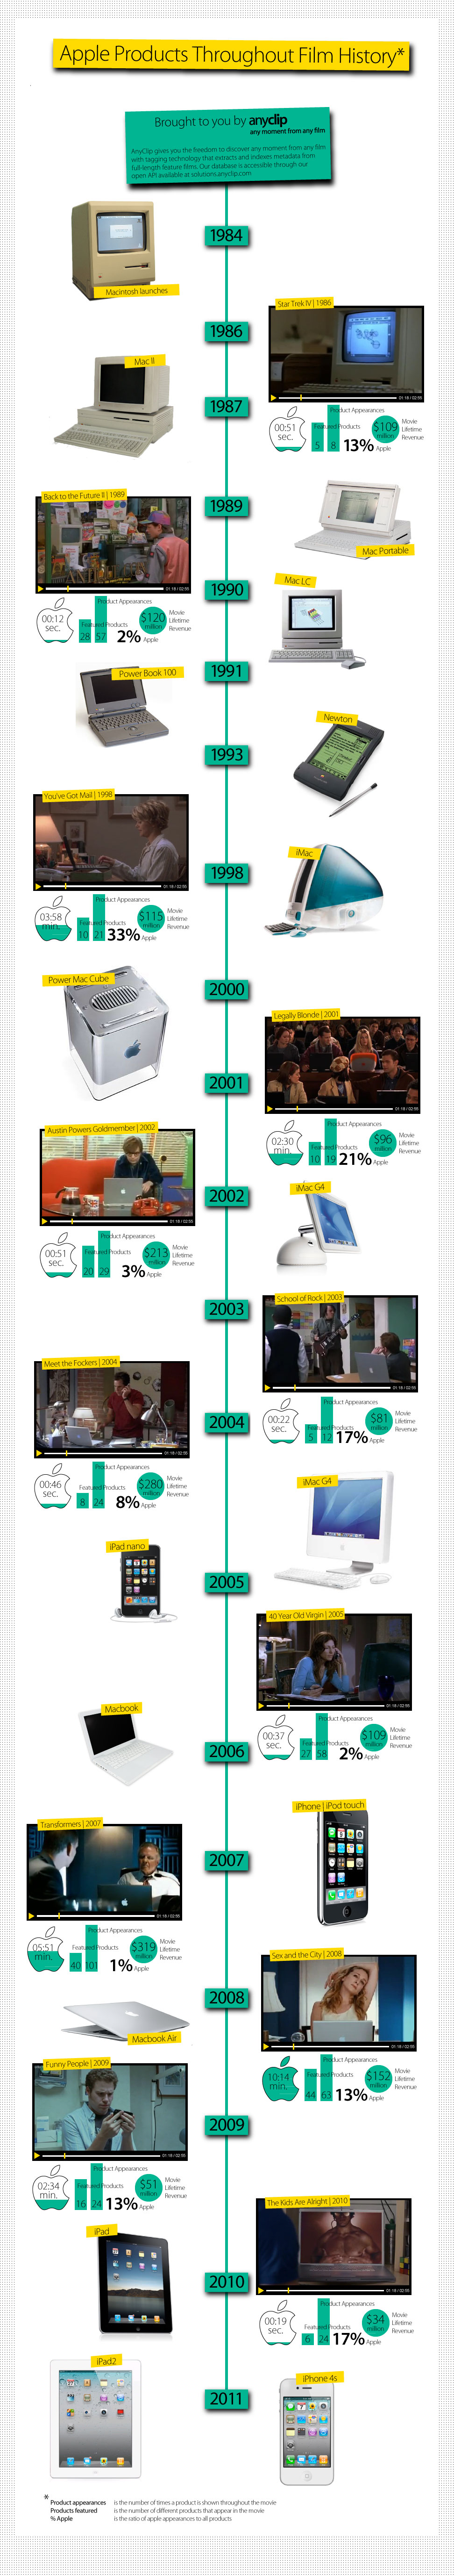 Apple Movie Product Placement Infographic